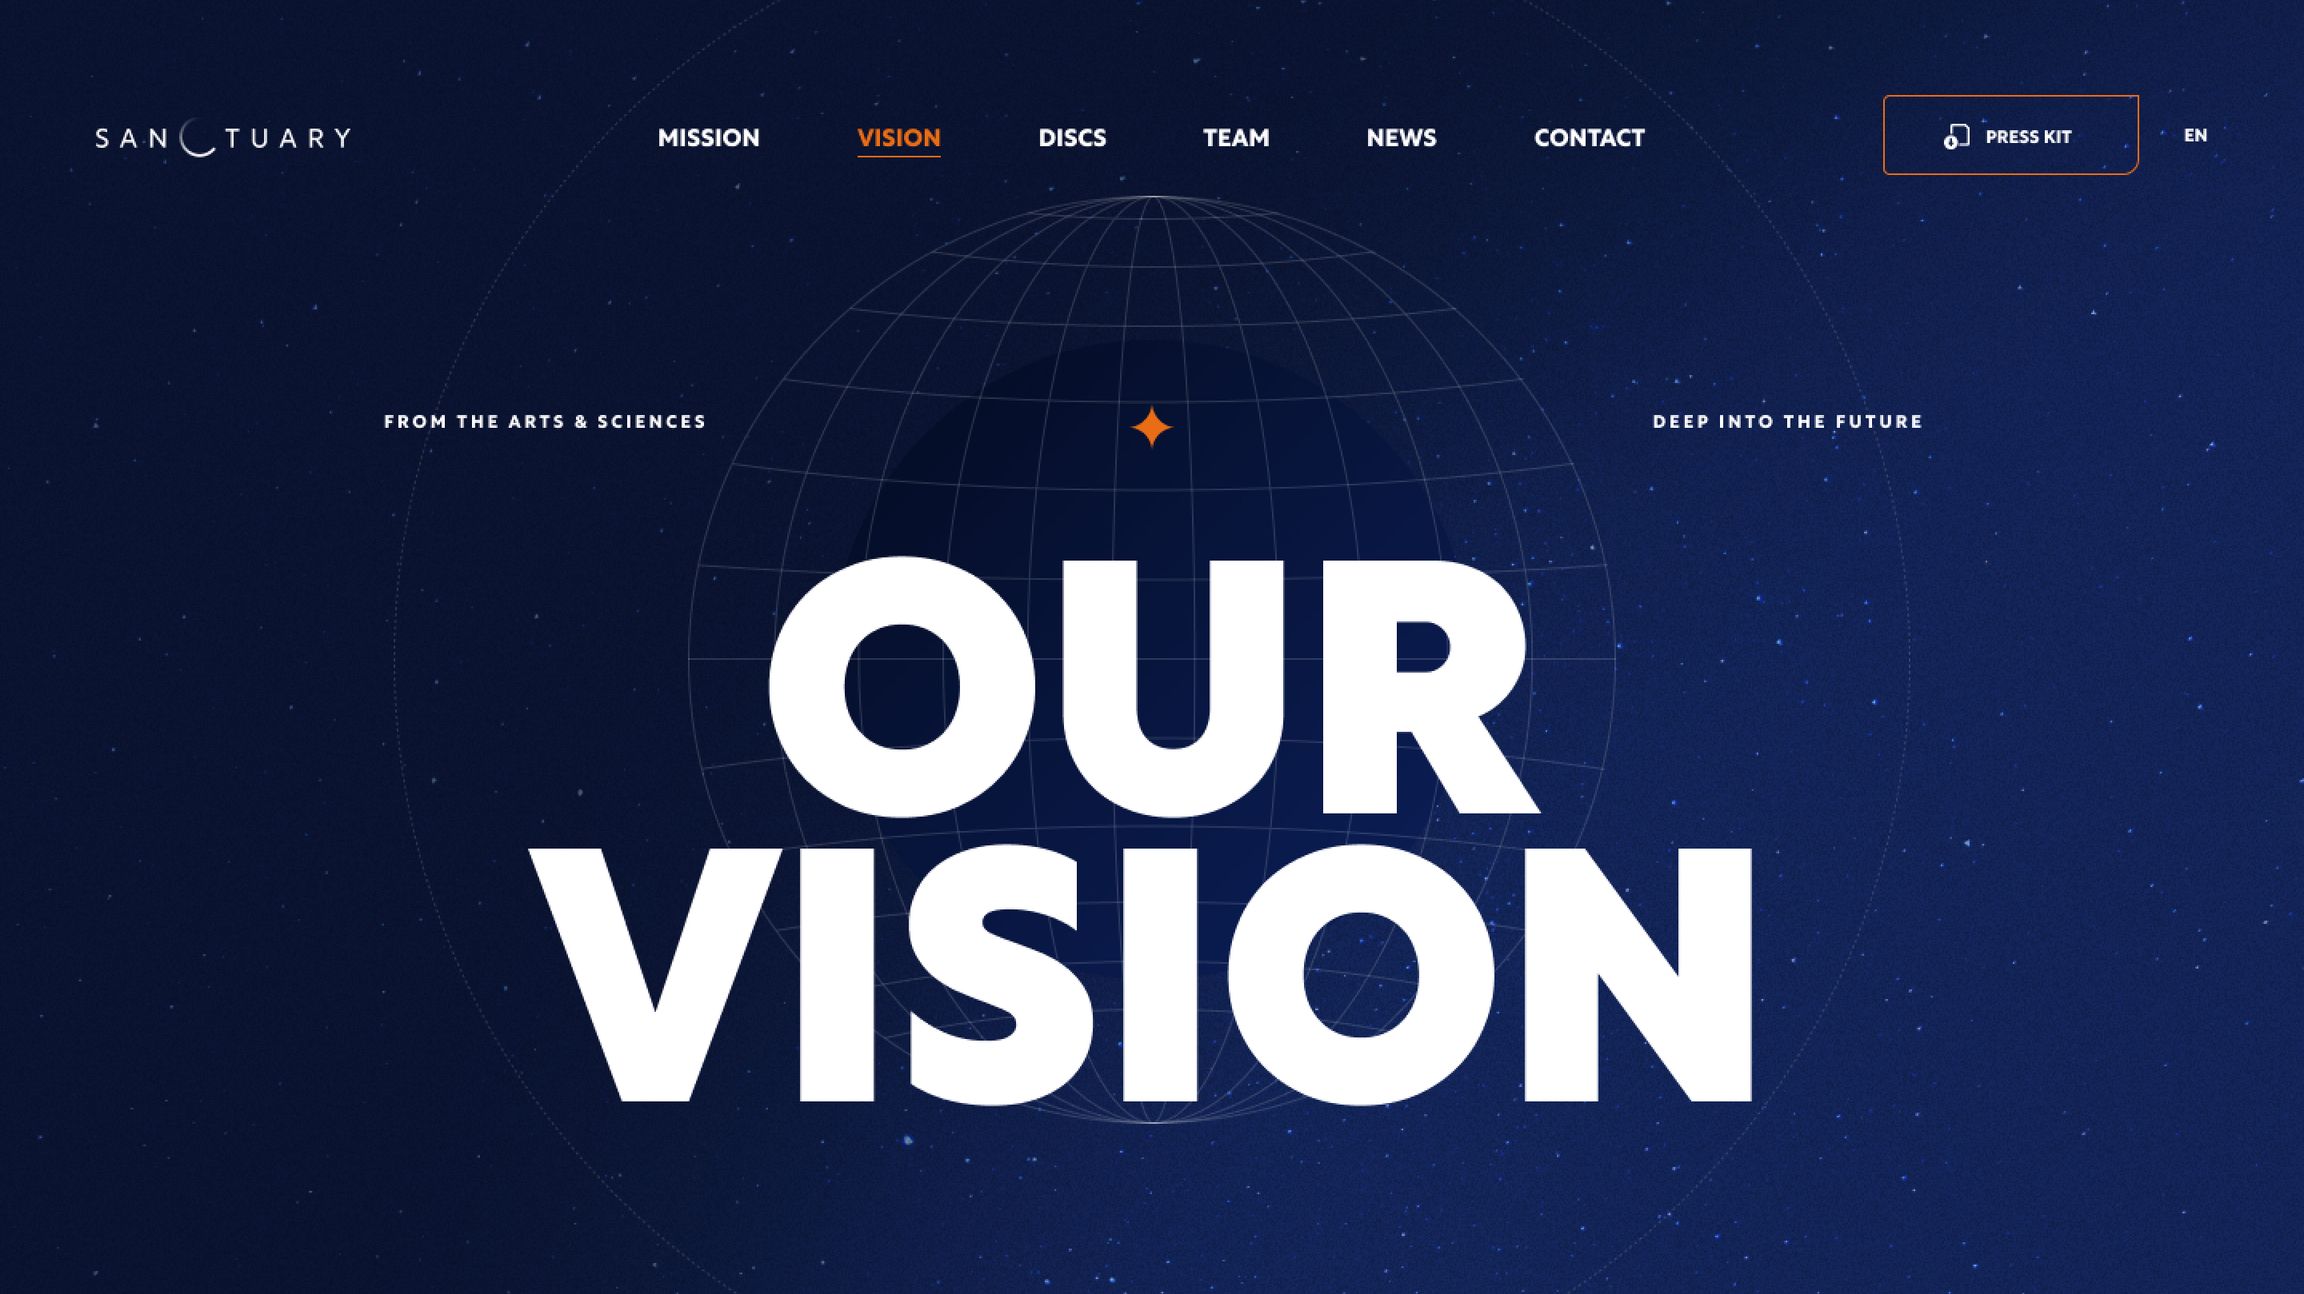 PAGE VISION Sanctuary on the moon - page notre vision 